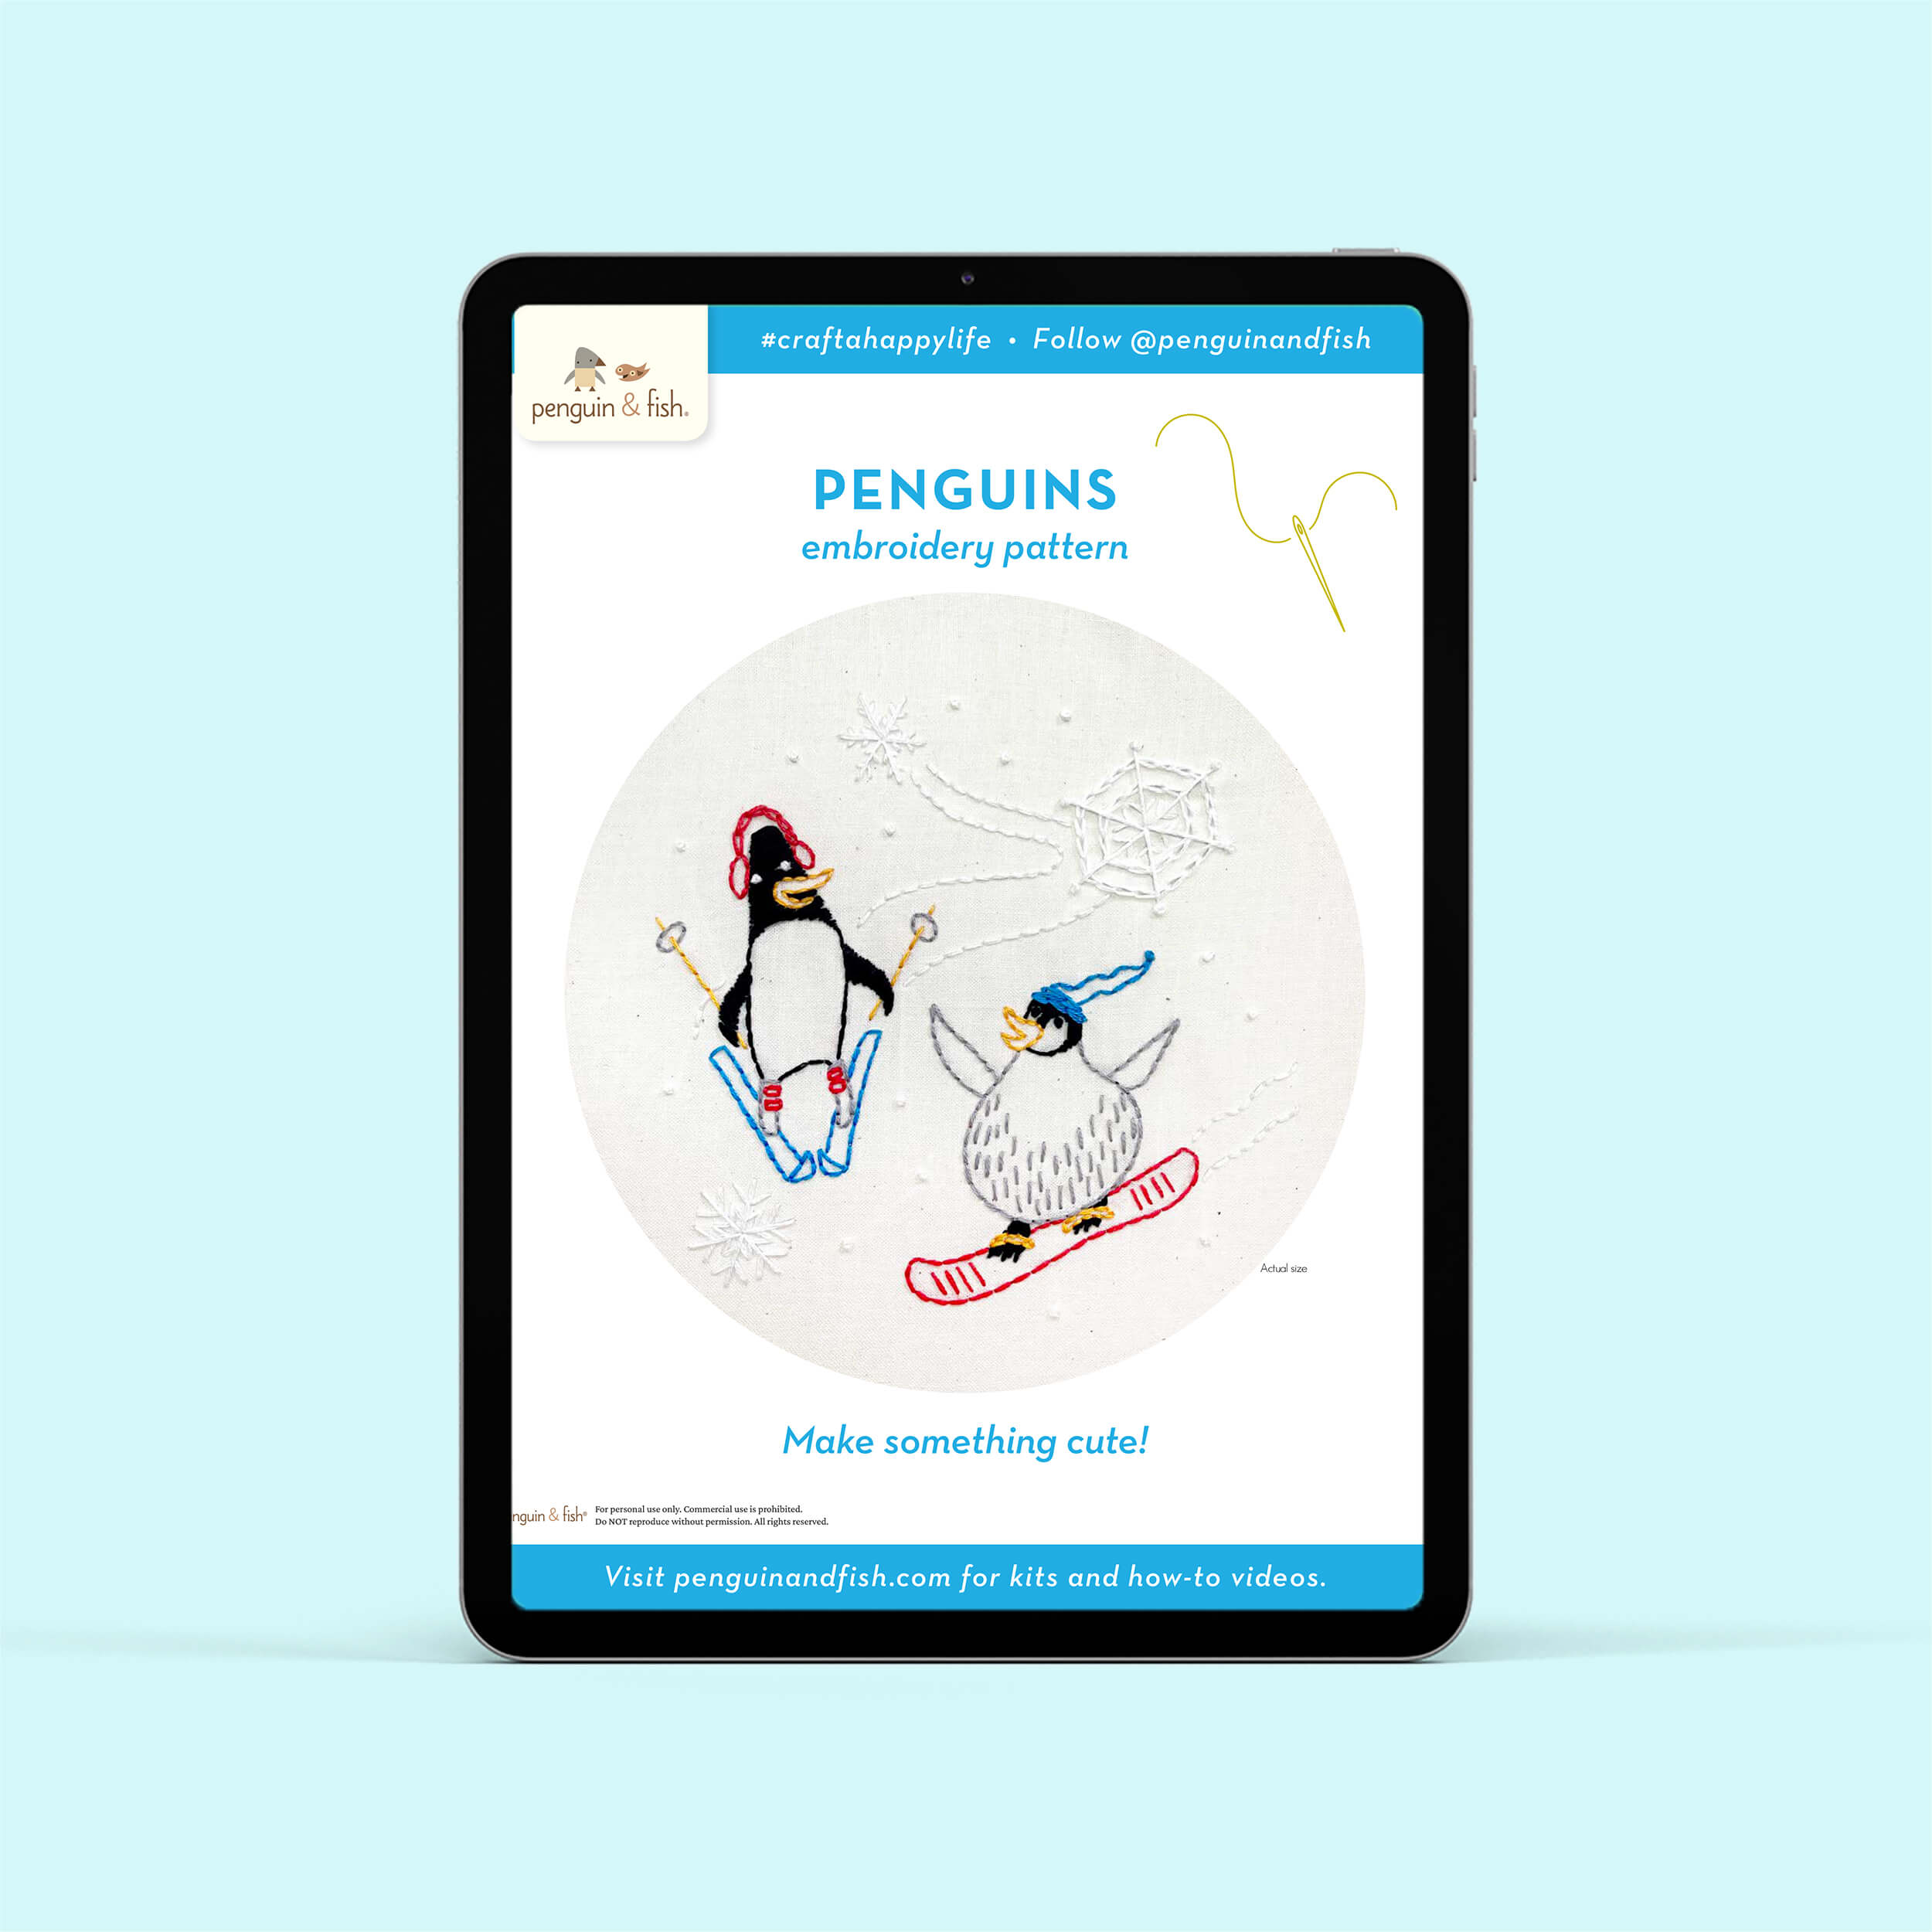 Penguins PDF embroidery pattern shown on a tablet